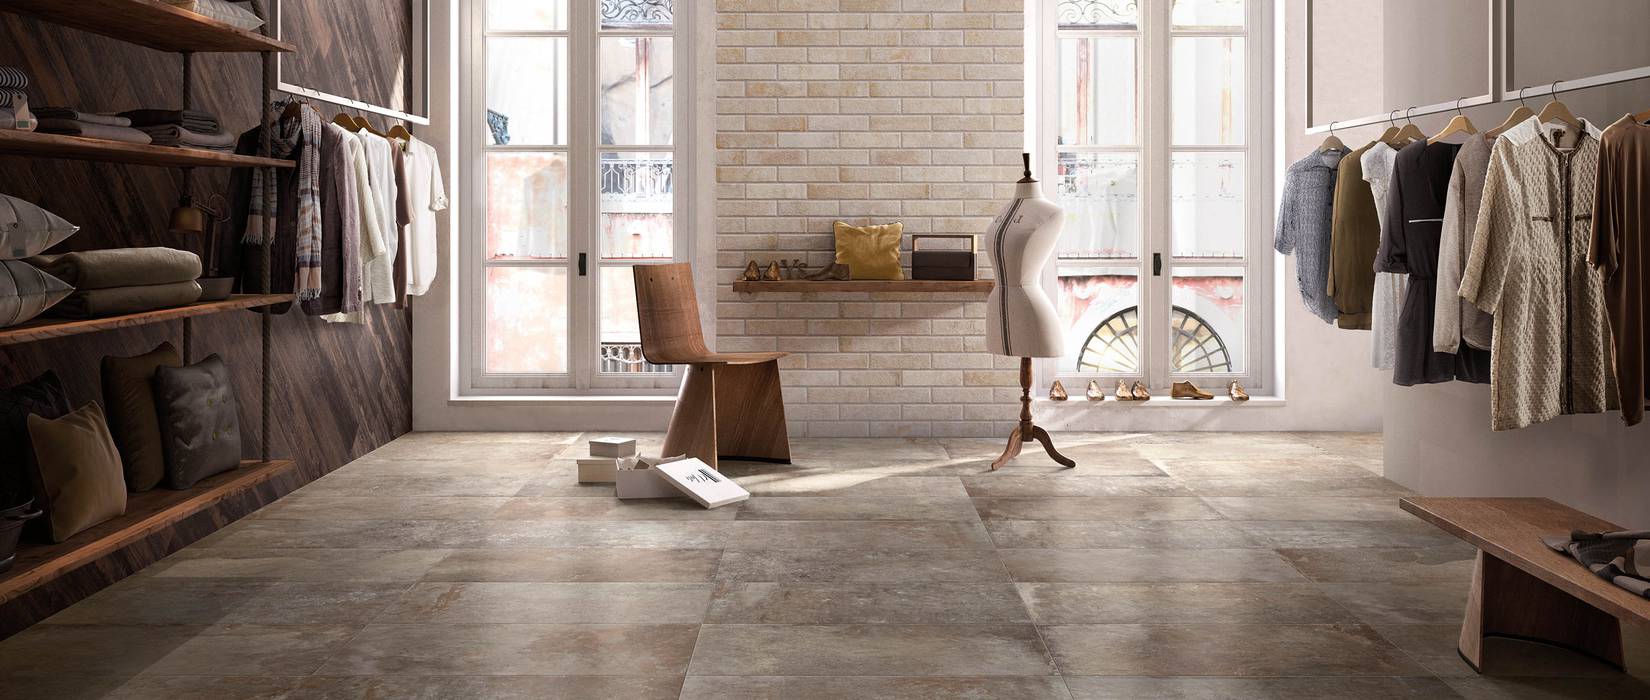 Recovery stone effect stoneware tiles